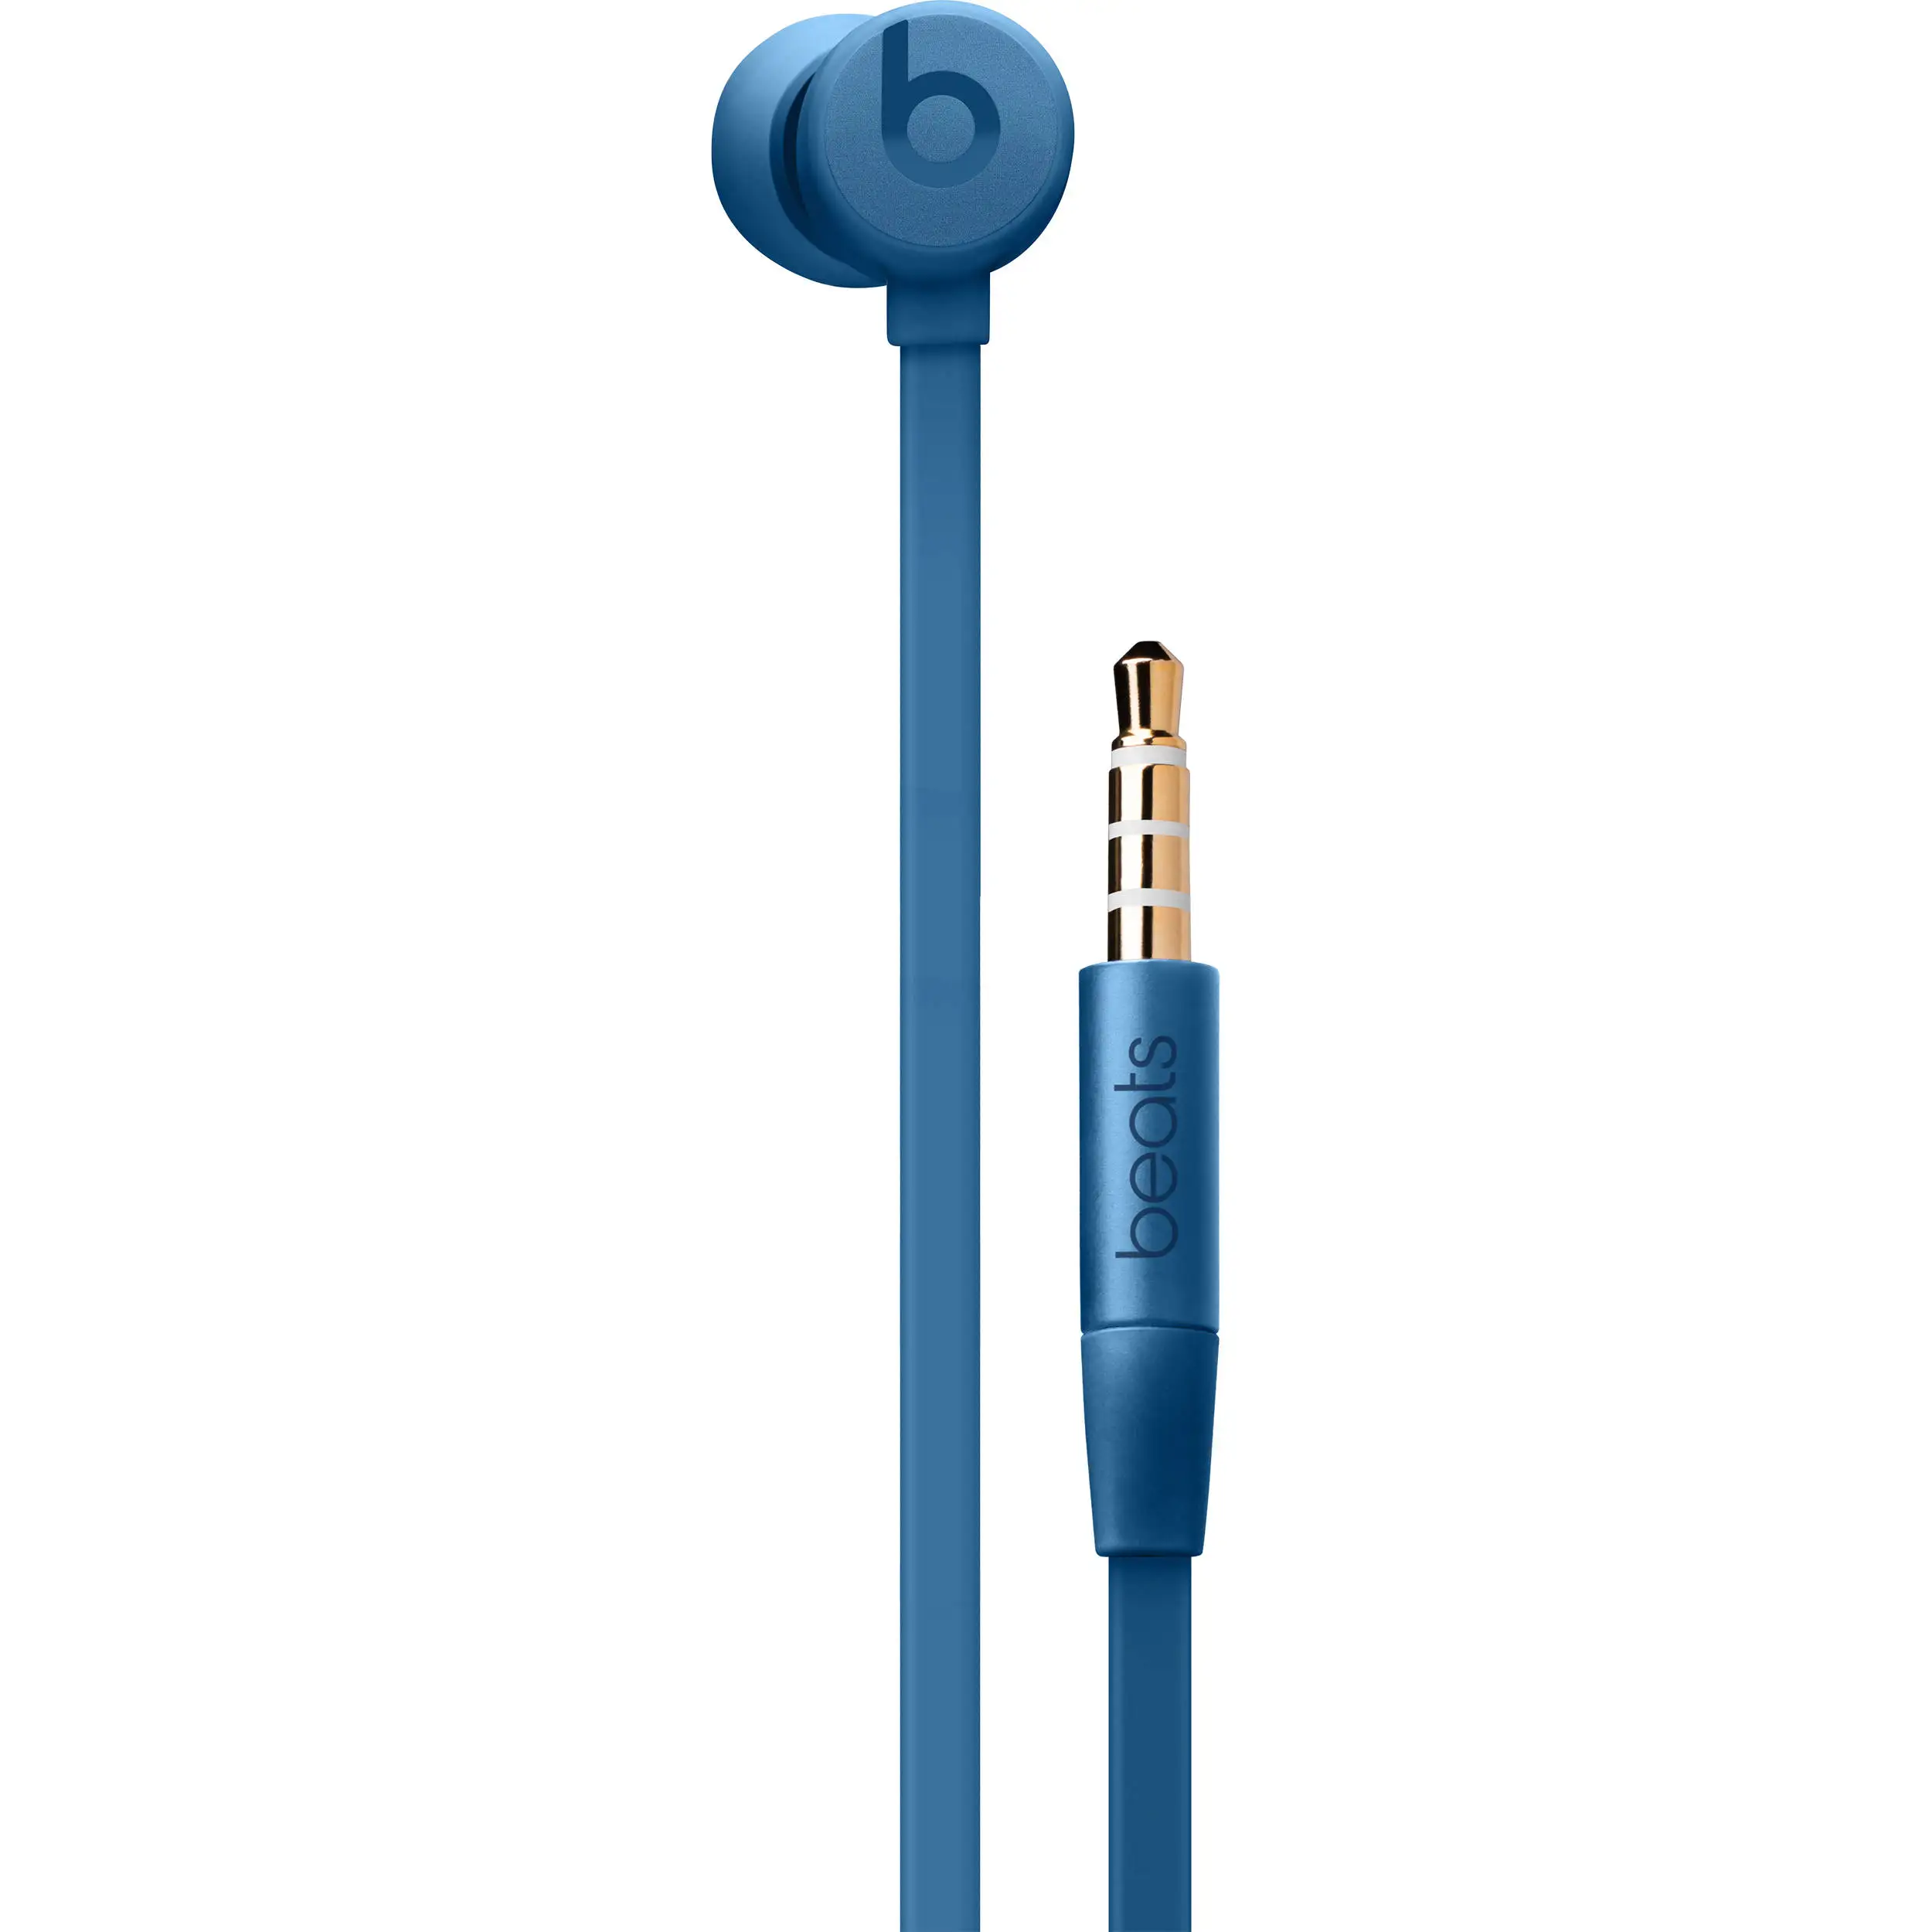 Blue 3.5Mm Cable Fine Tuned Acoustic Design Delivers An Exceptional Listening Experience